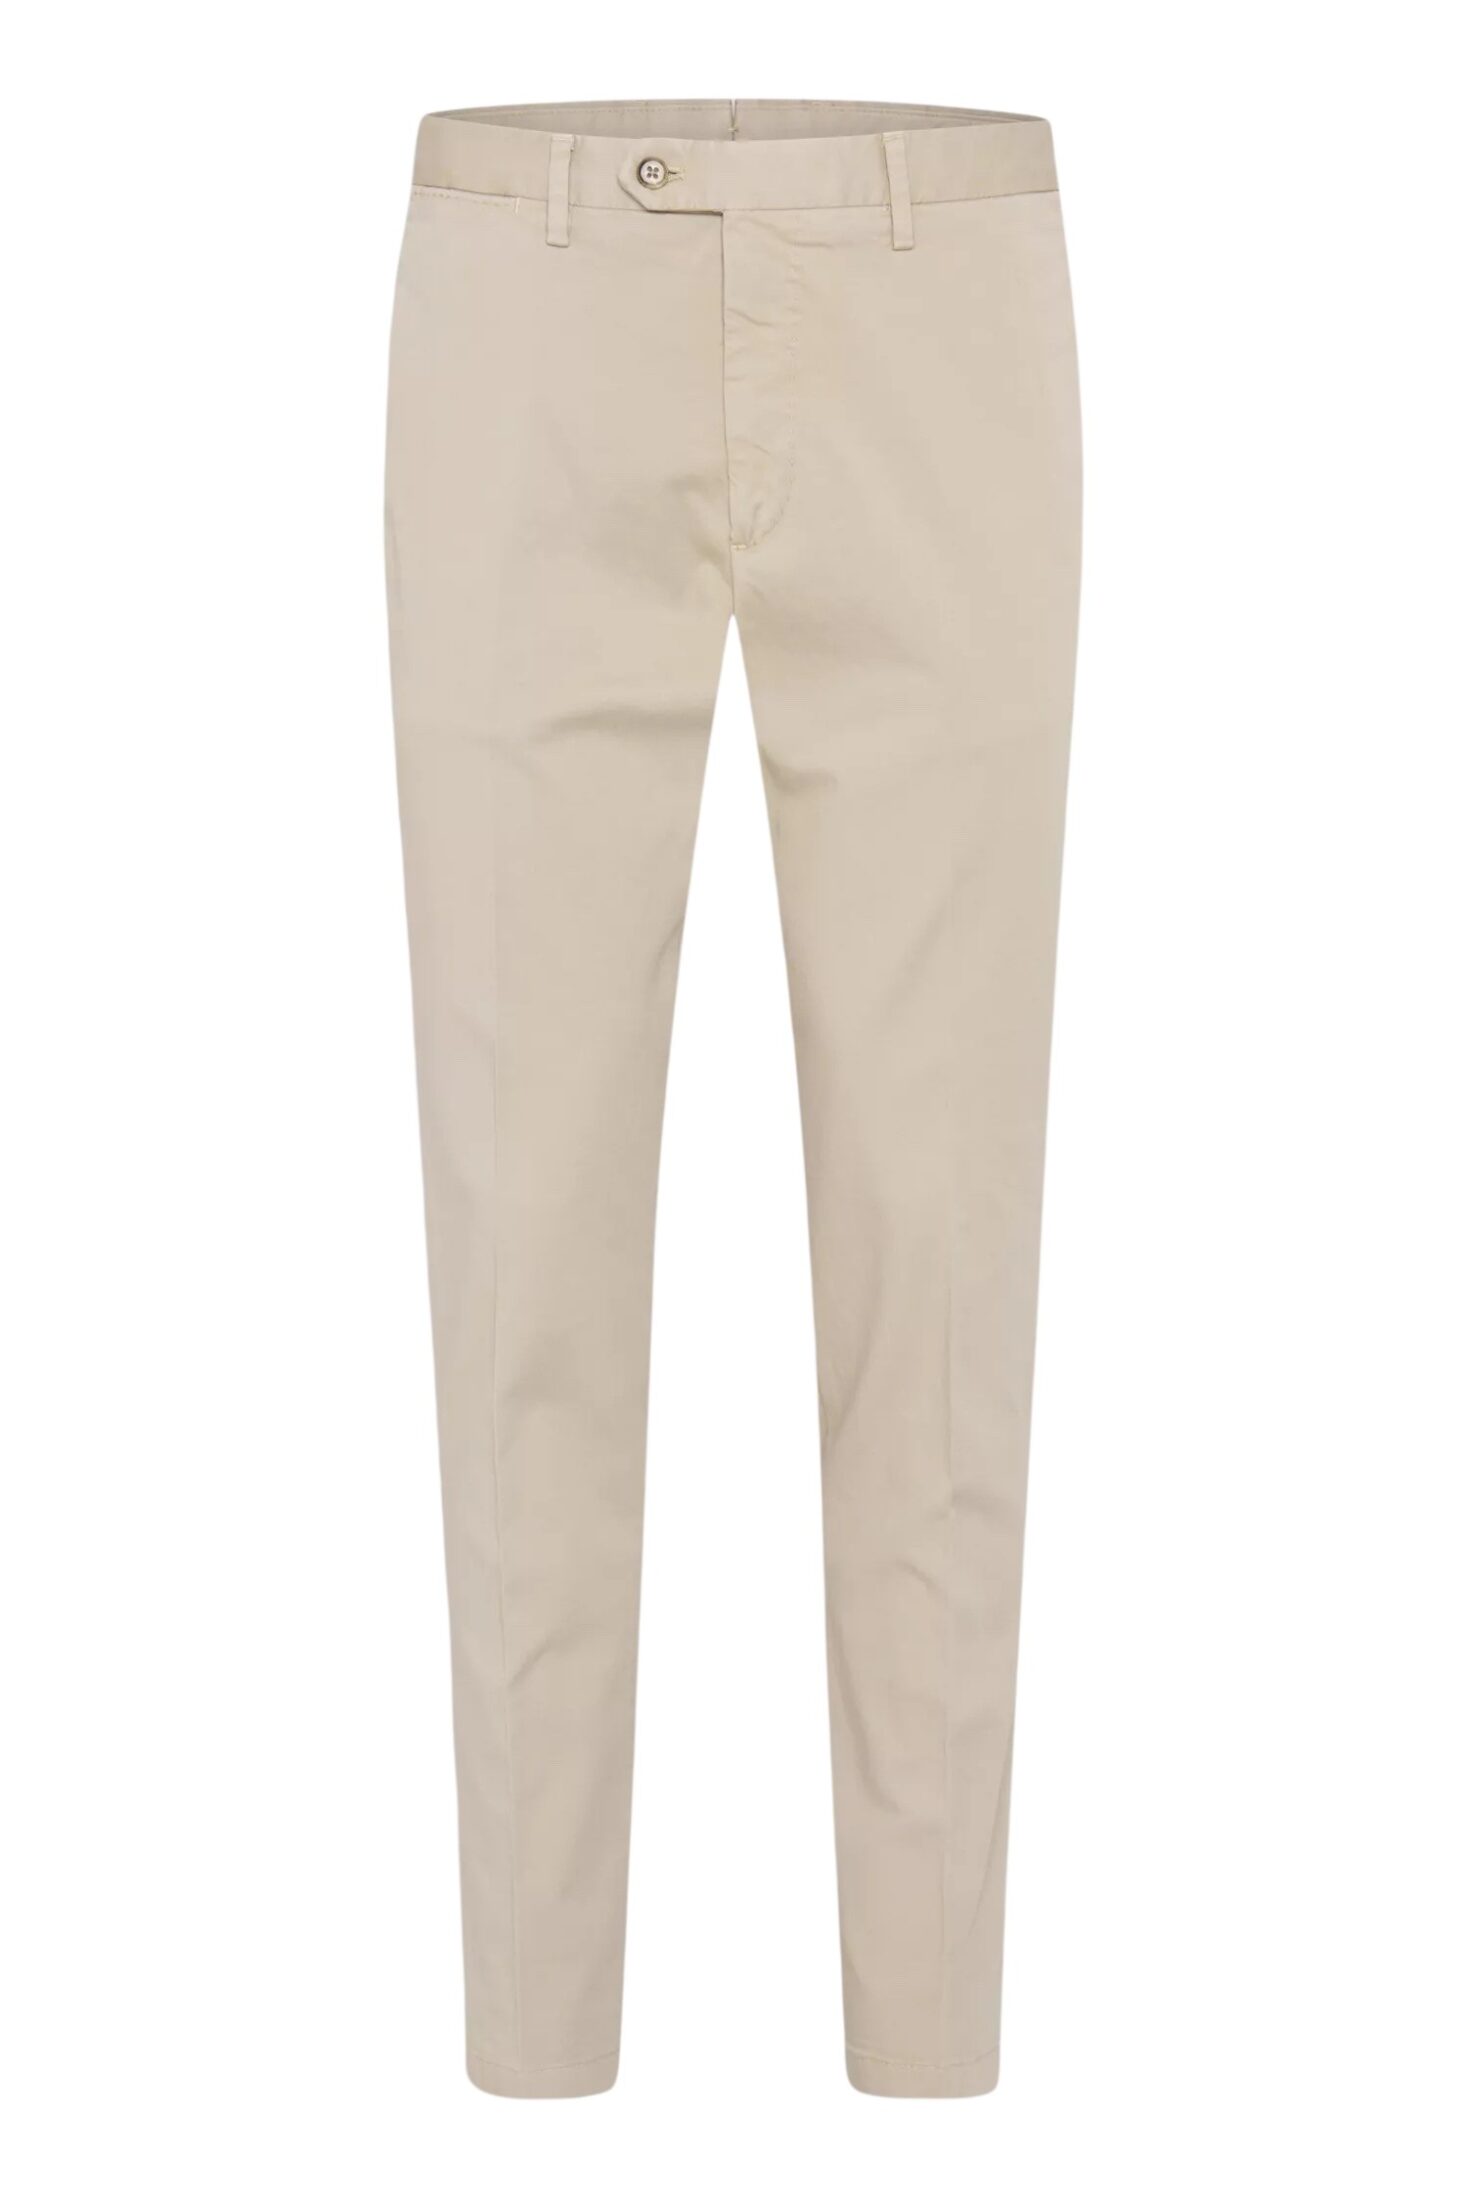 oscar-jacobson_danwick-trousers_beige-washed-sand_51764305_485_front